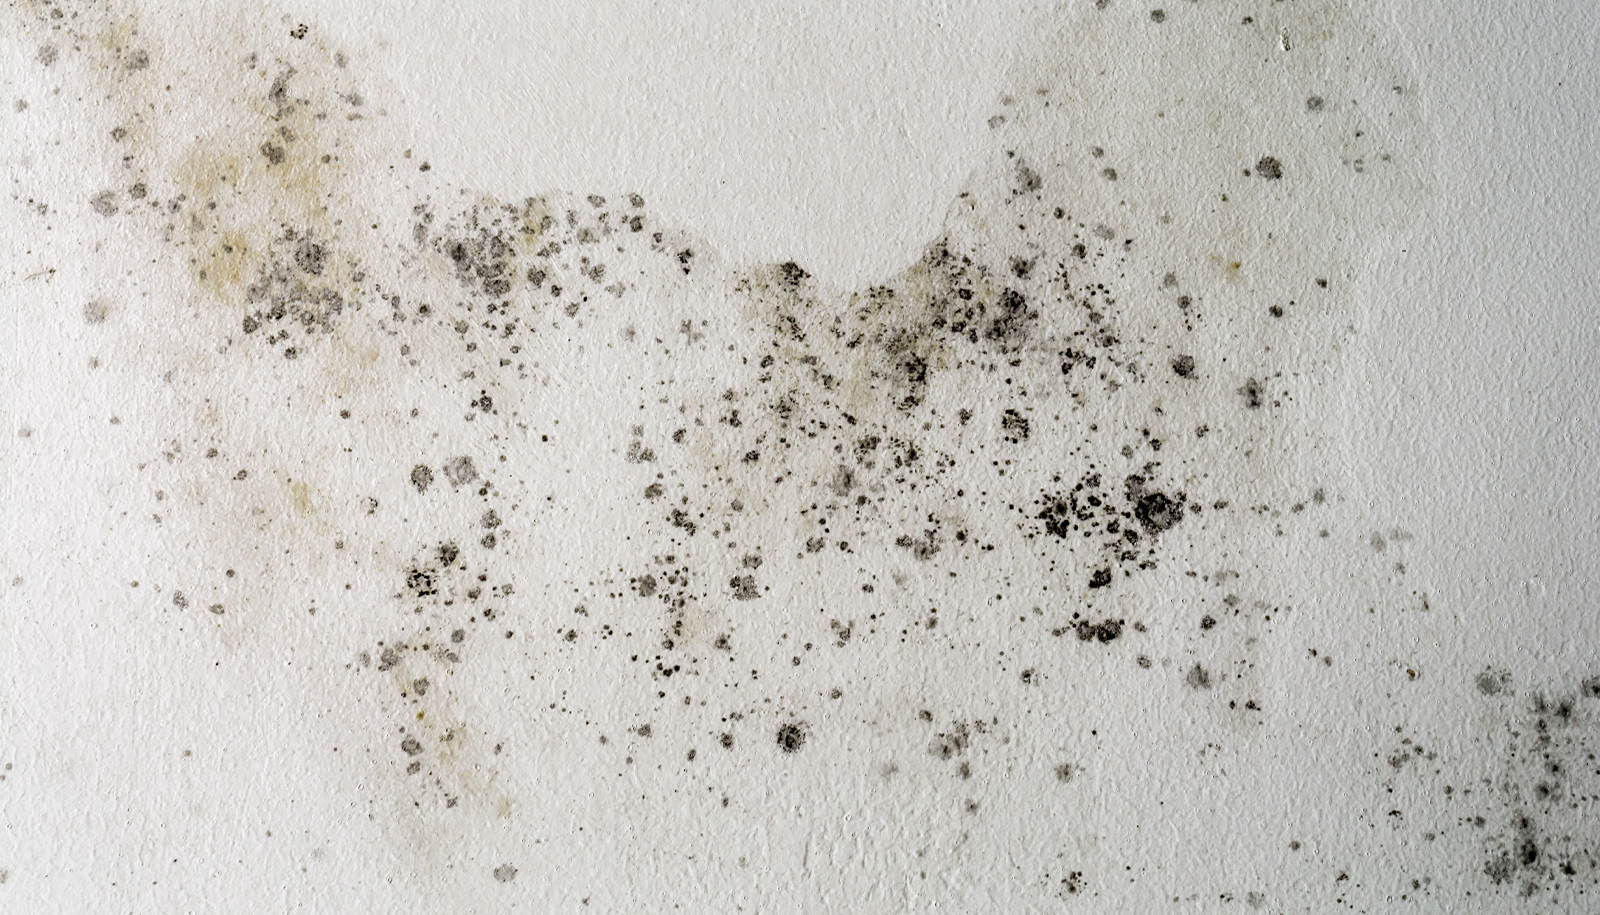 Homeowners Insurance & Mold: What You Need to Know